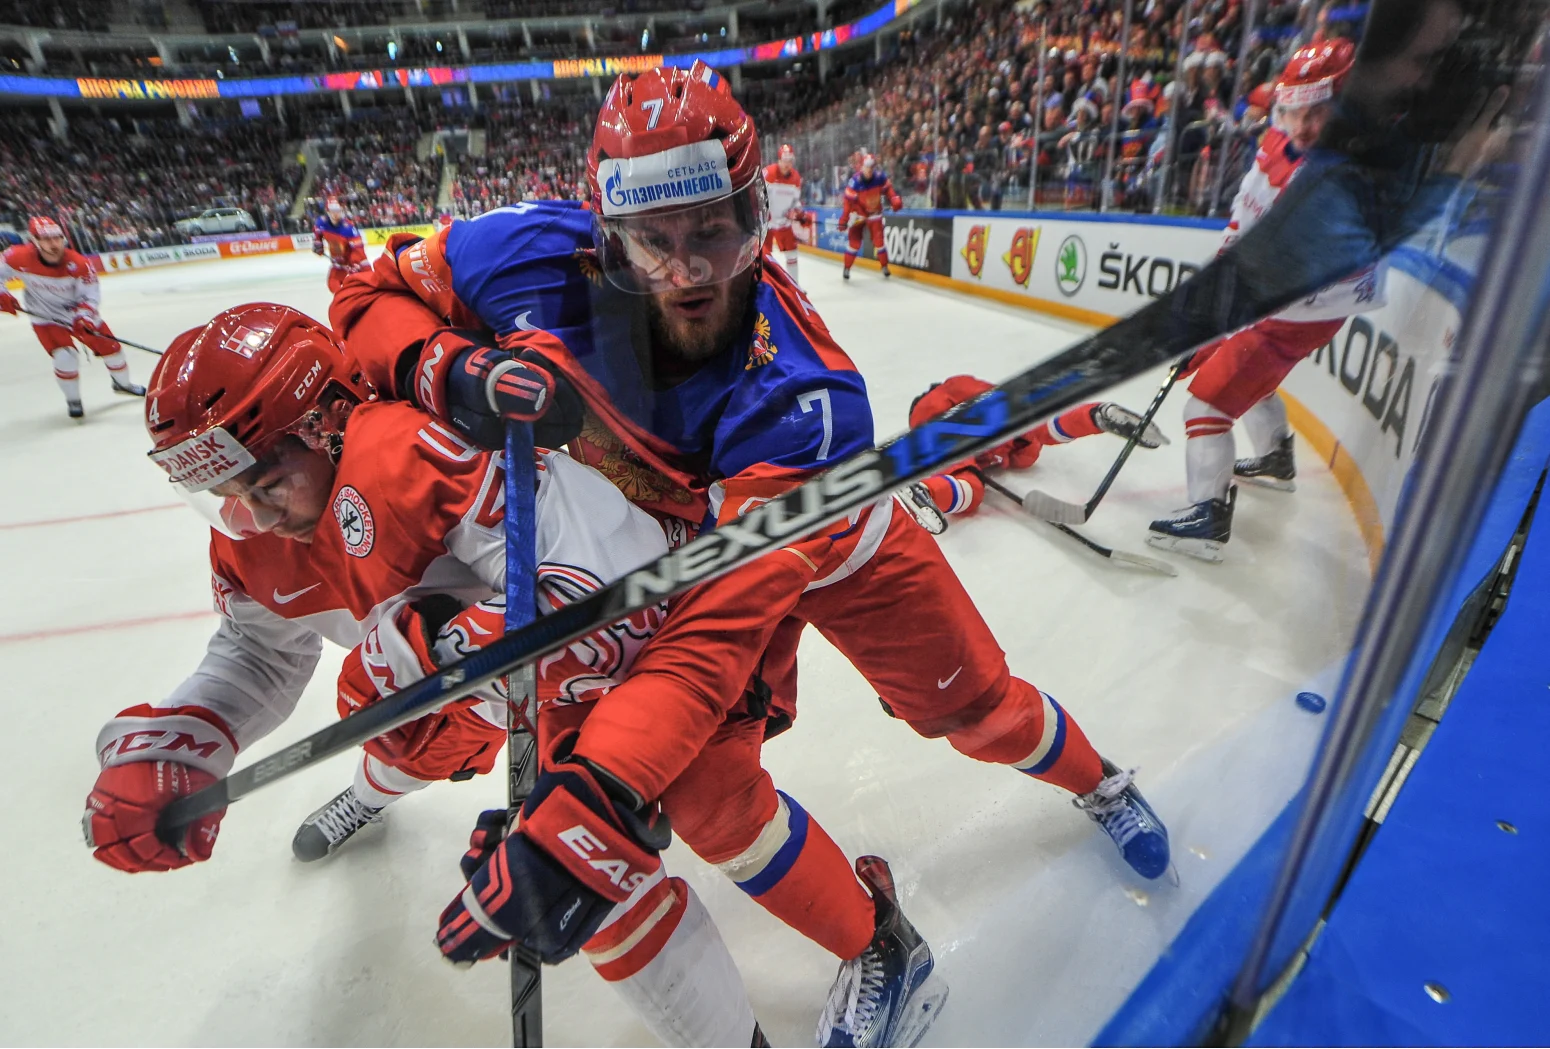 Another record-breaking year for the IIHF Ice Hockey World Championship